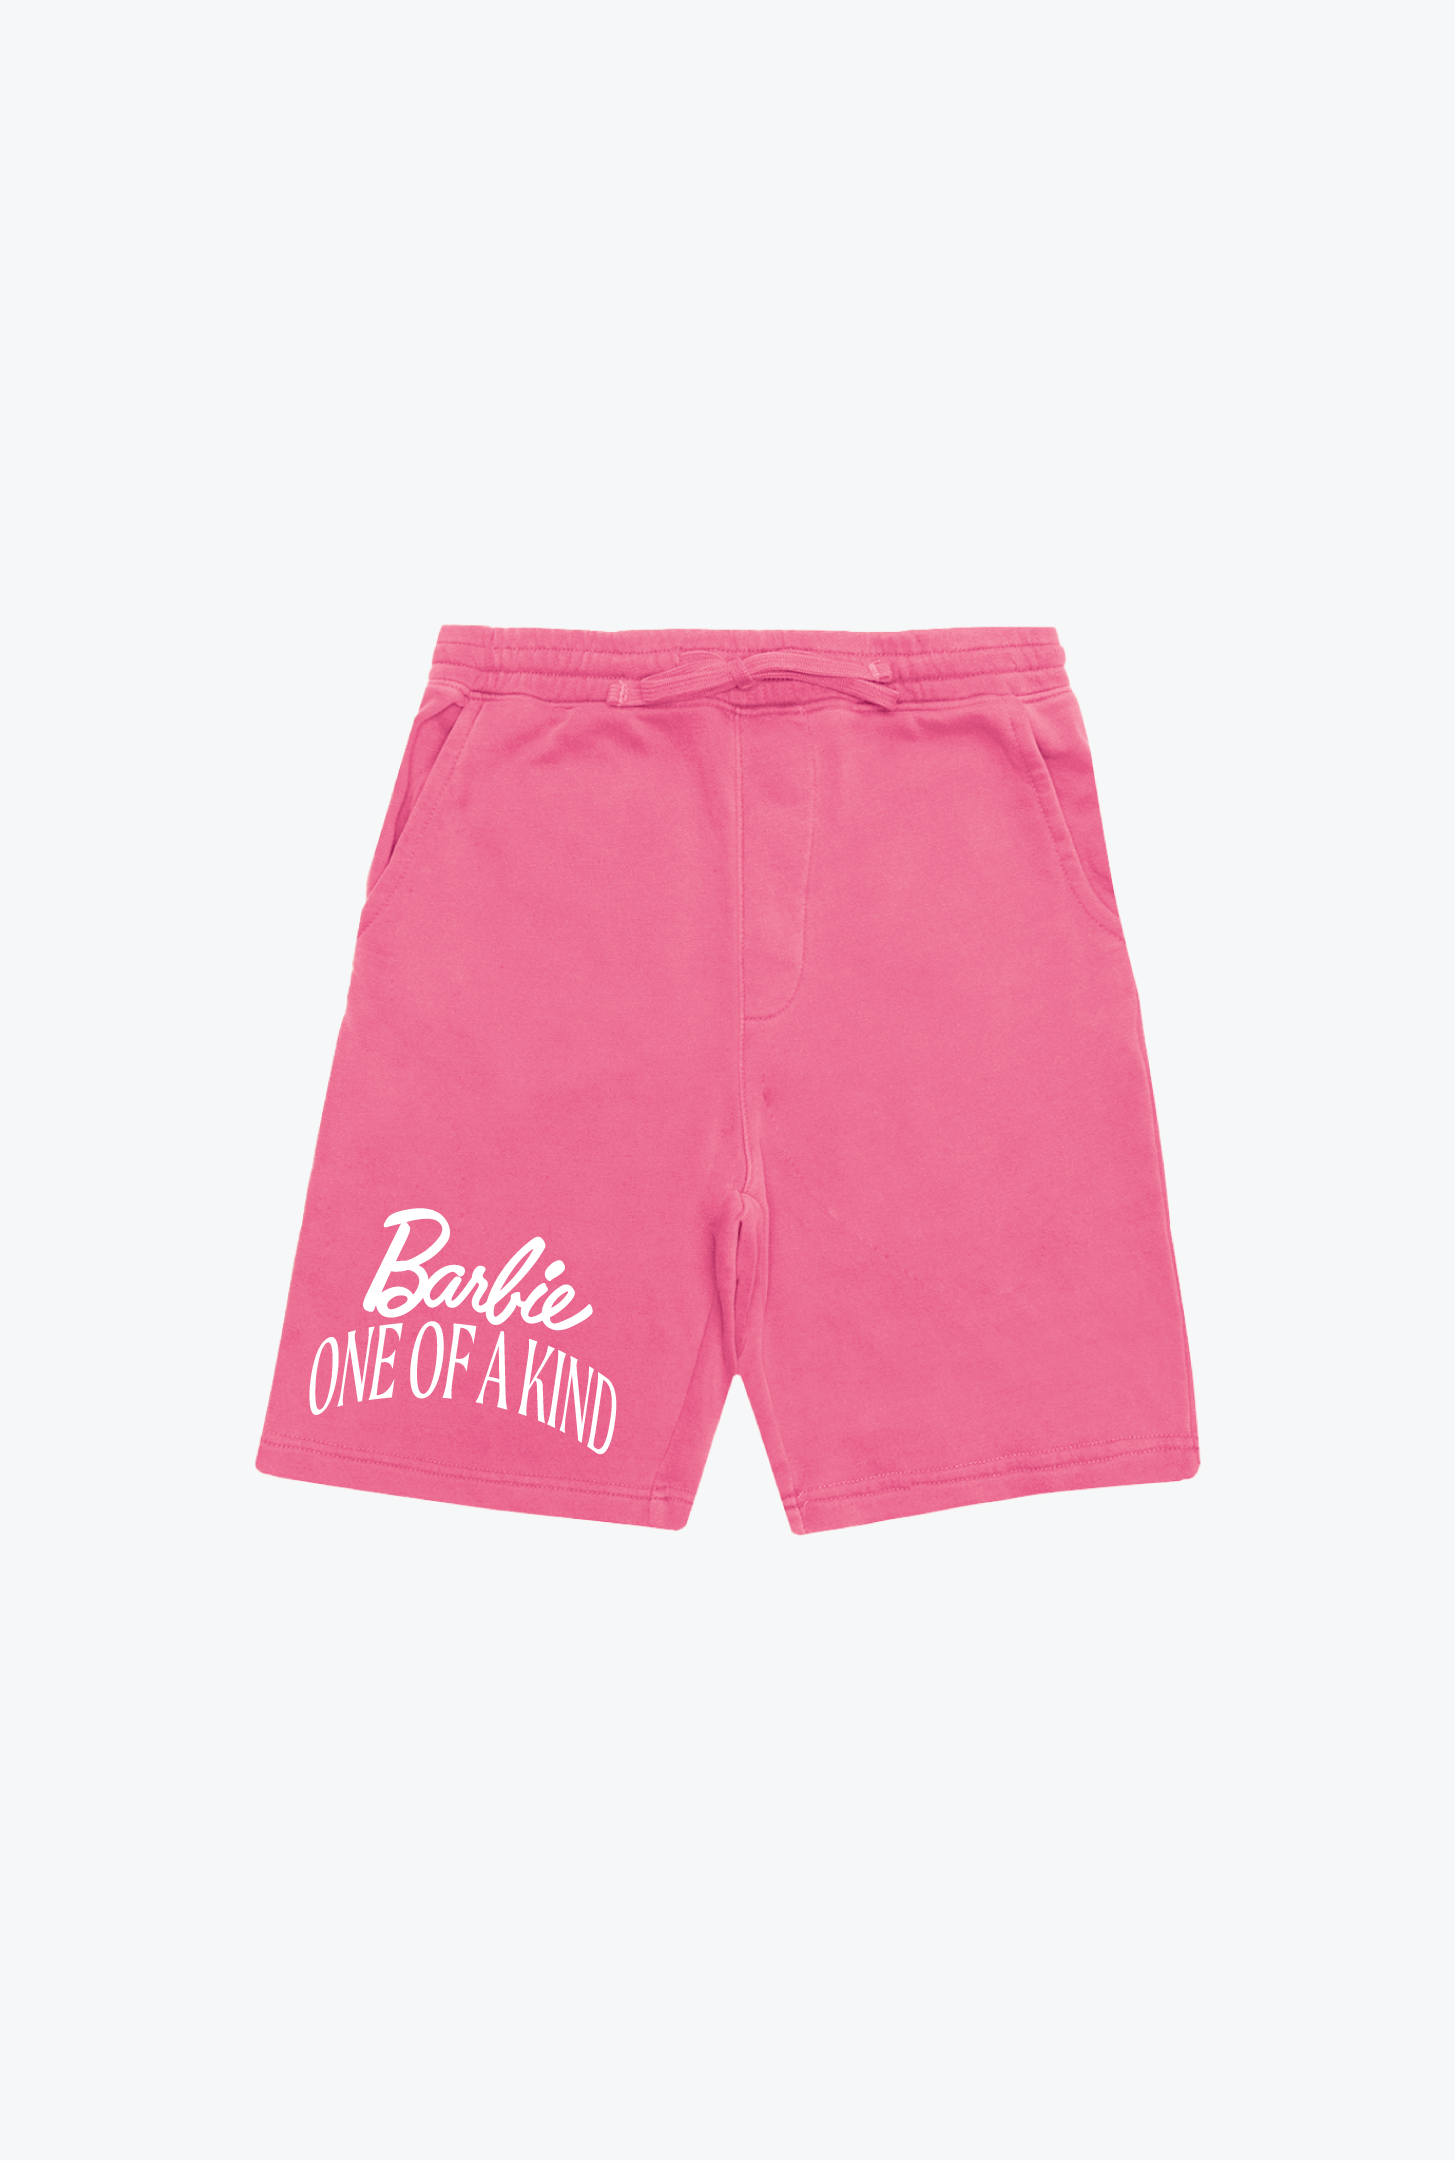 Barbie One Of A Kind Pigment Dye Shorts - Pink